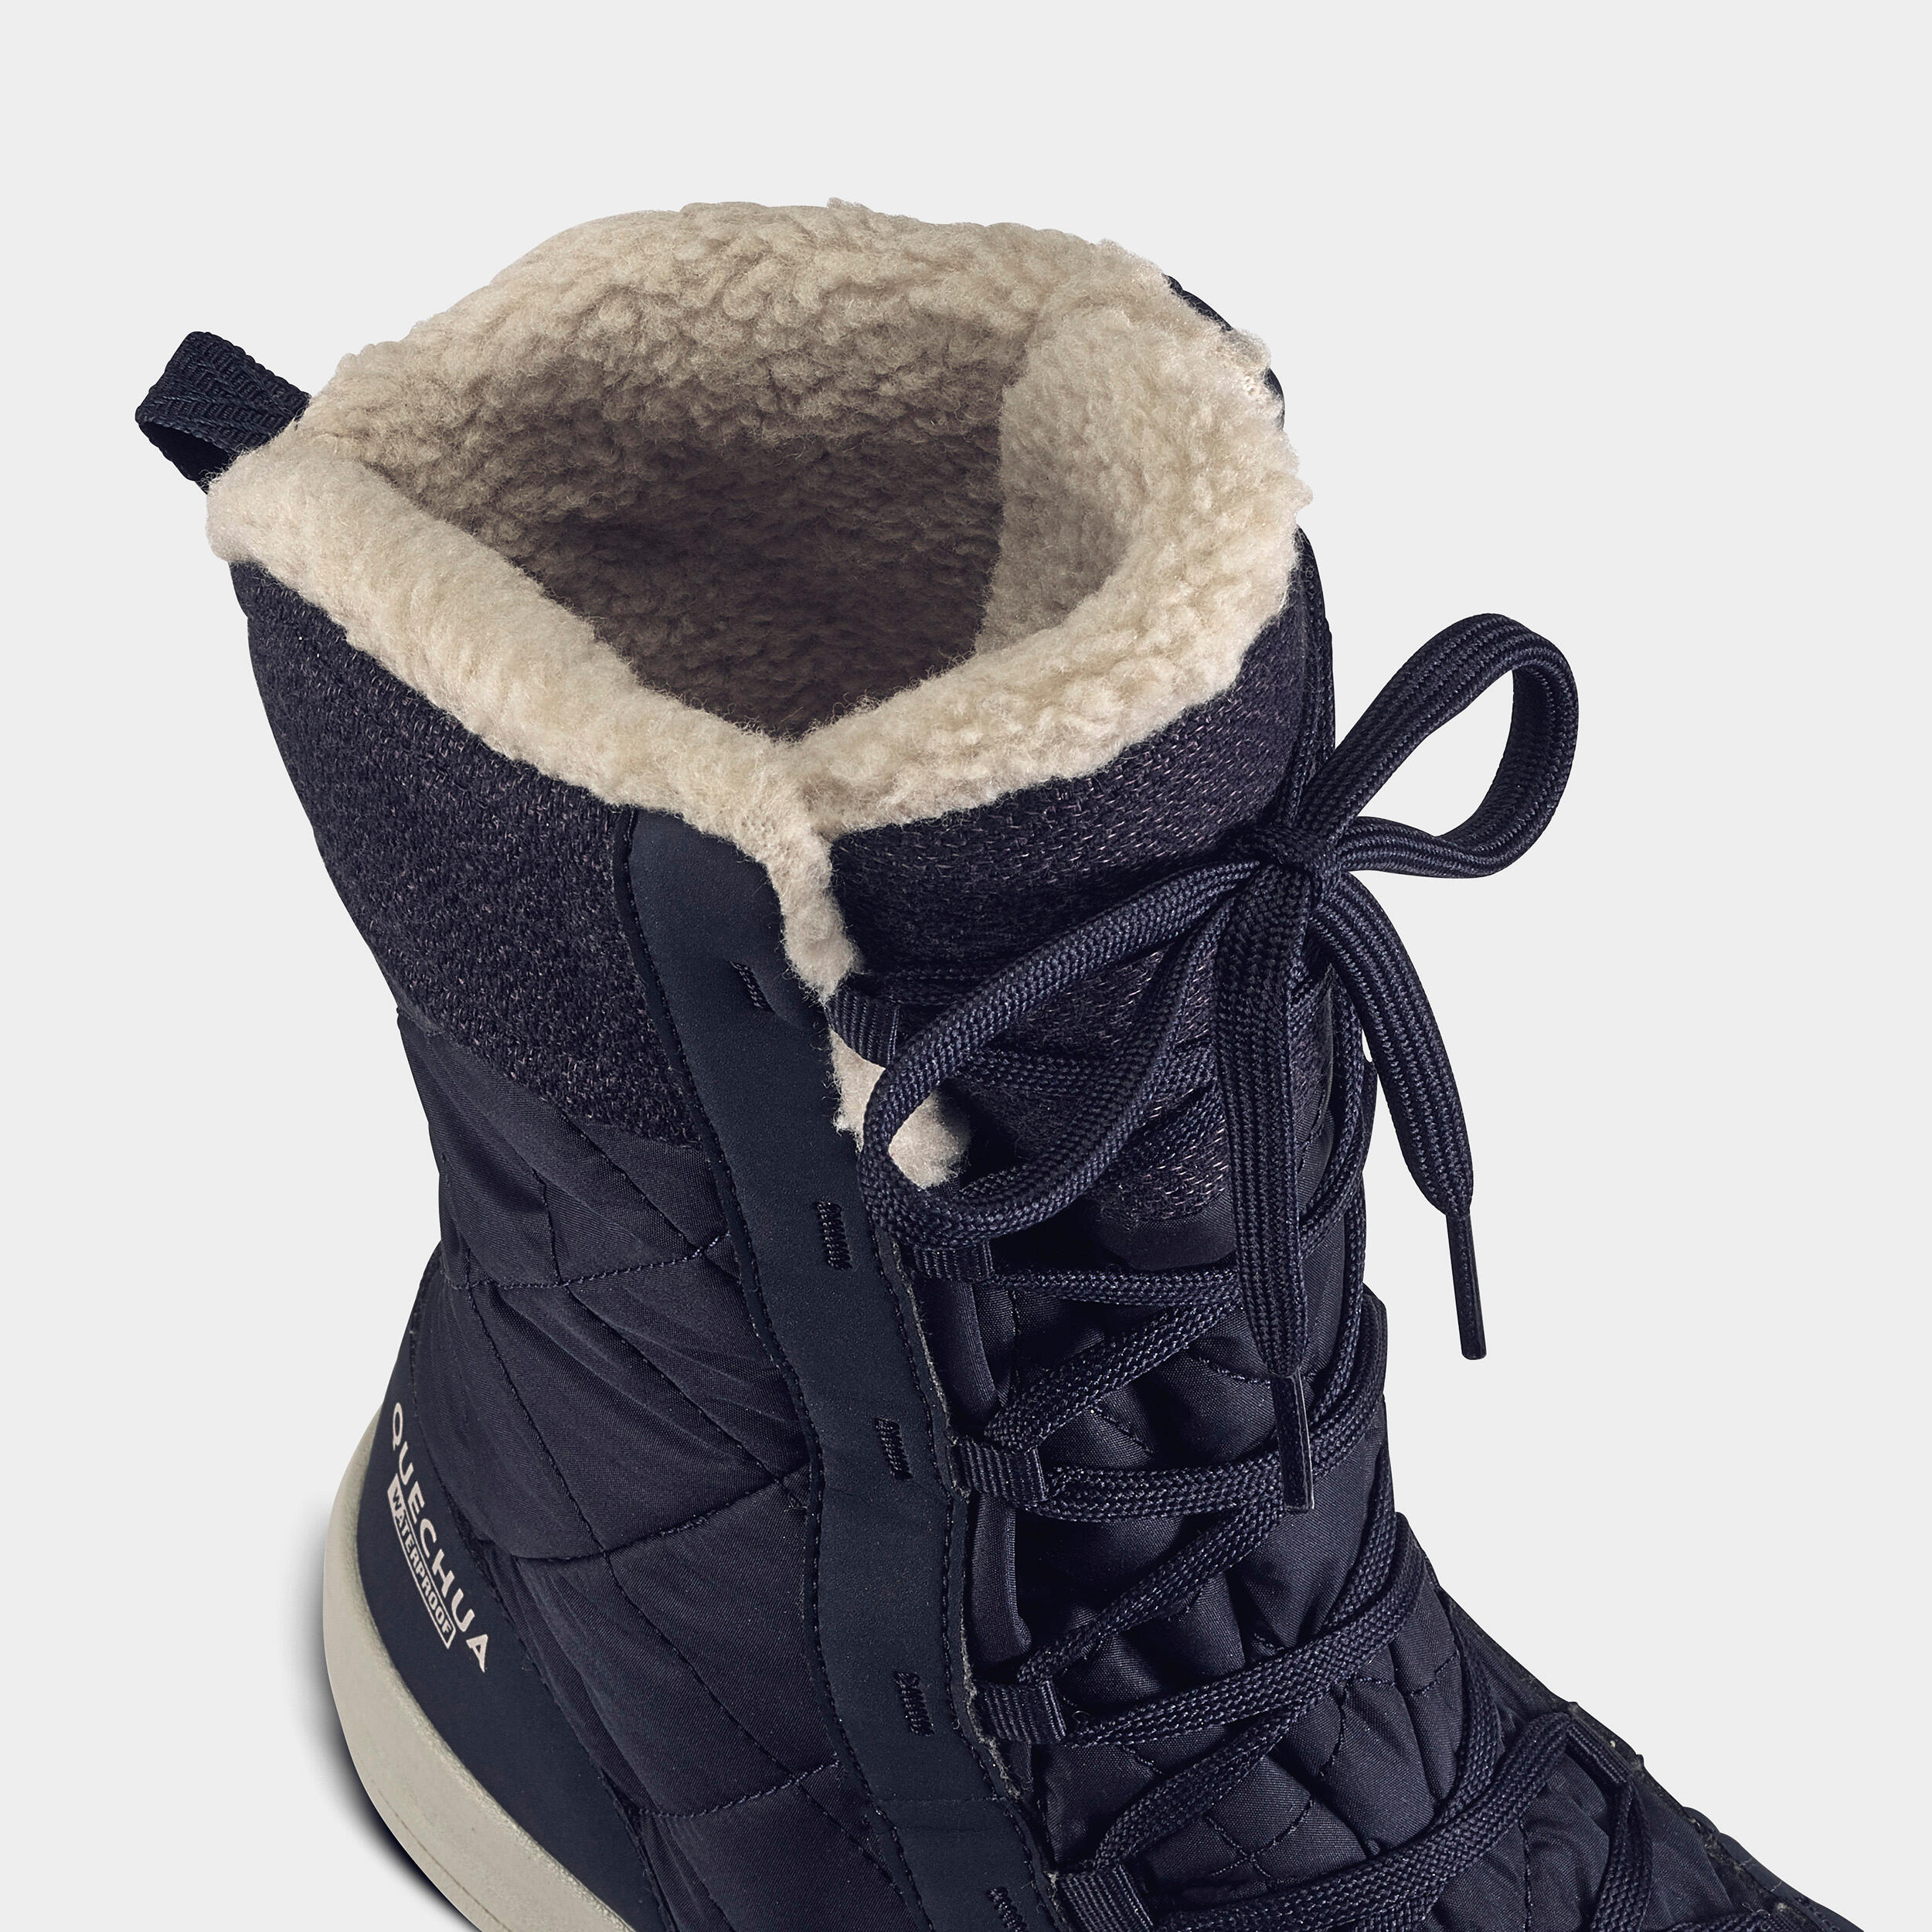 Women's warm waterproof snow boots - SH500 high - lace-up  6/7